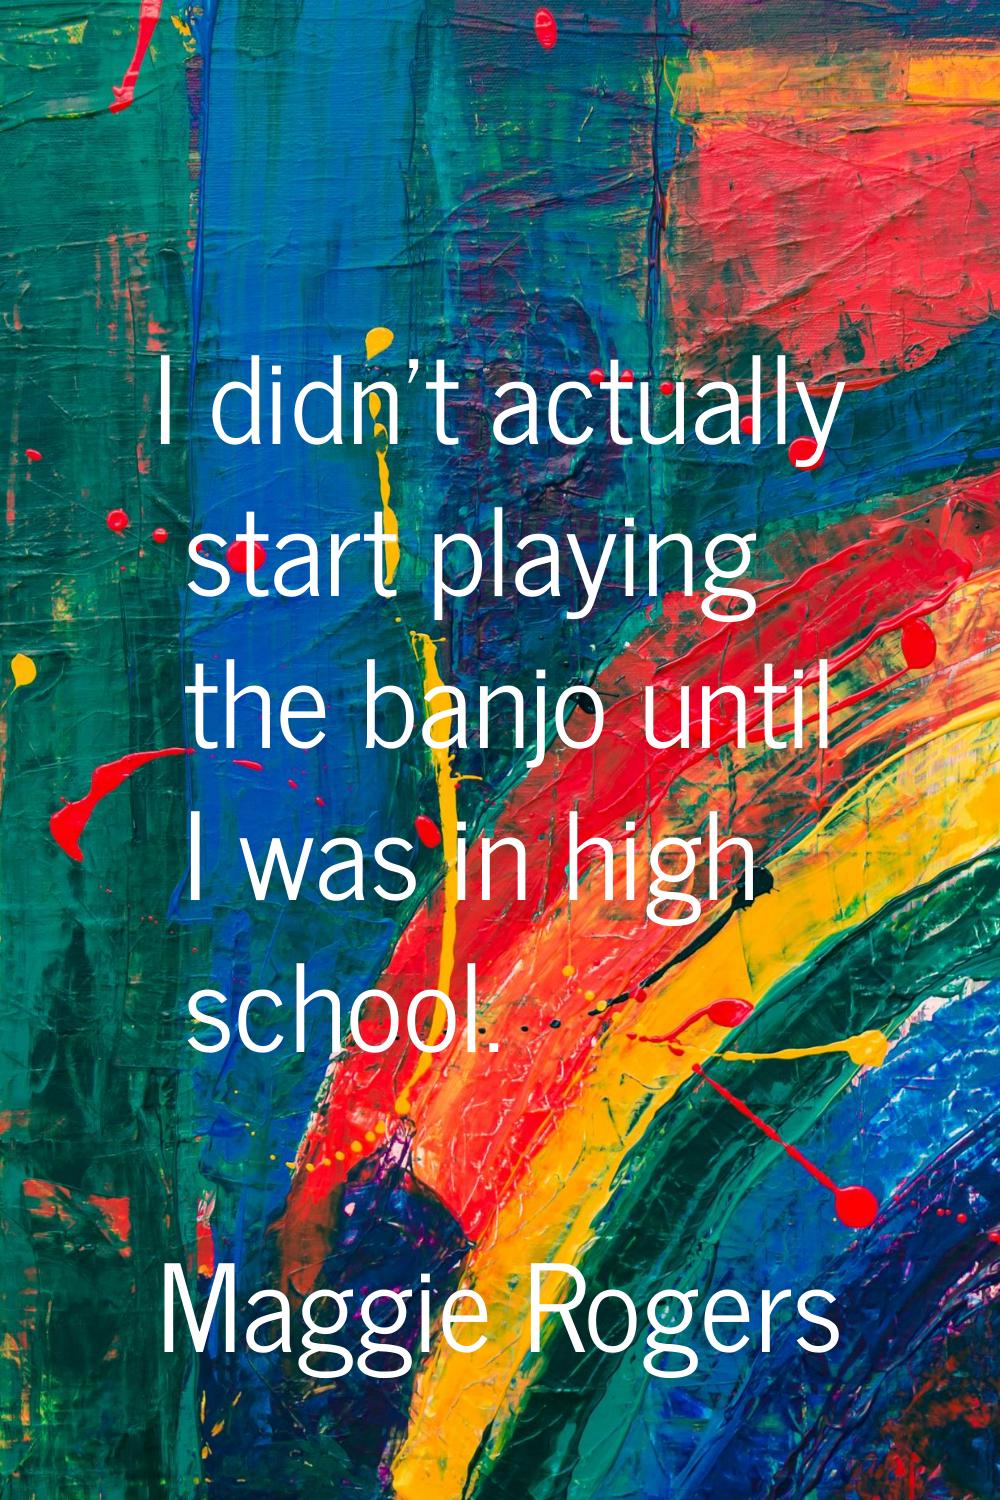 I didn't actually start playing the banjo until I was in high school.